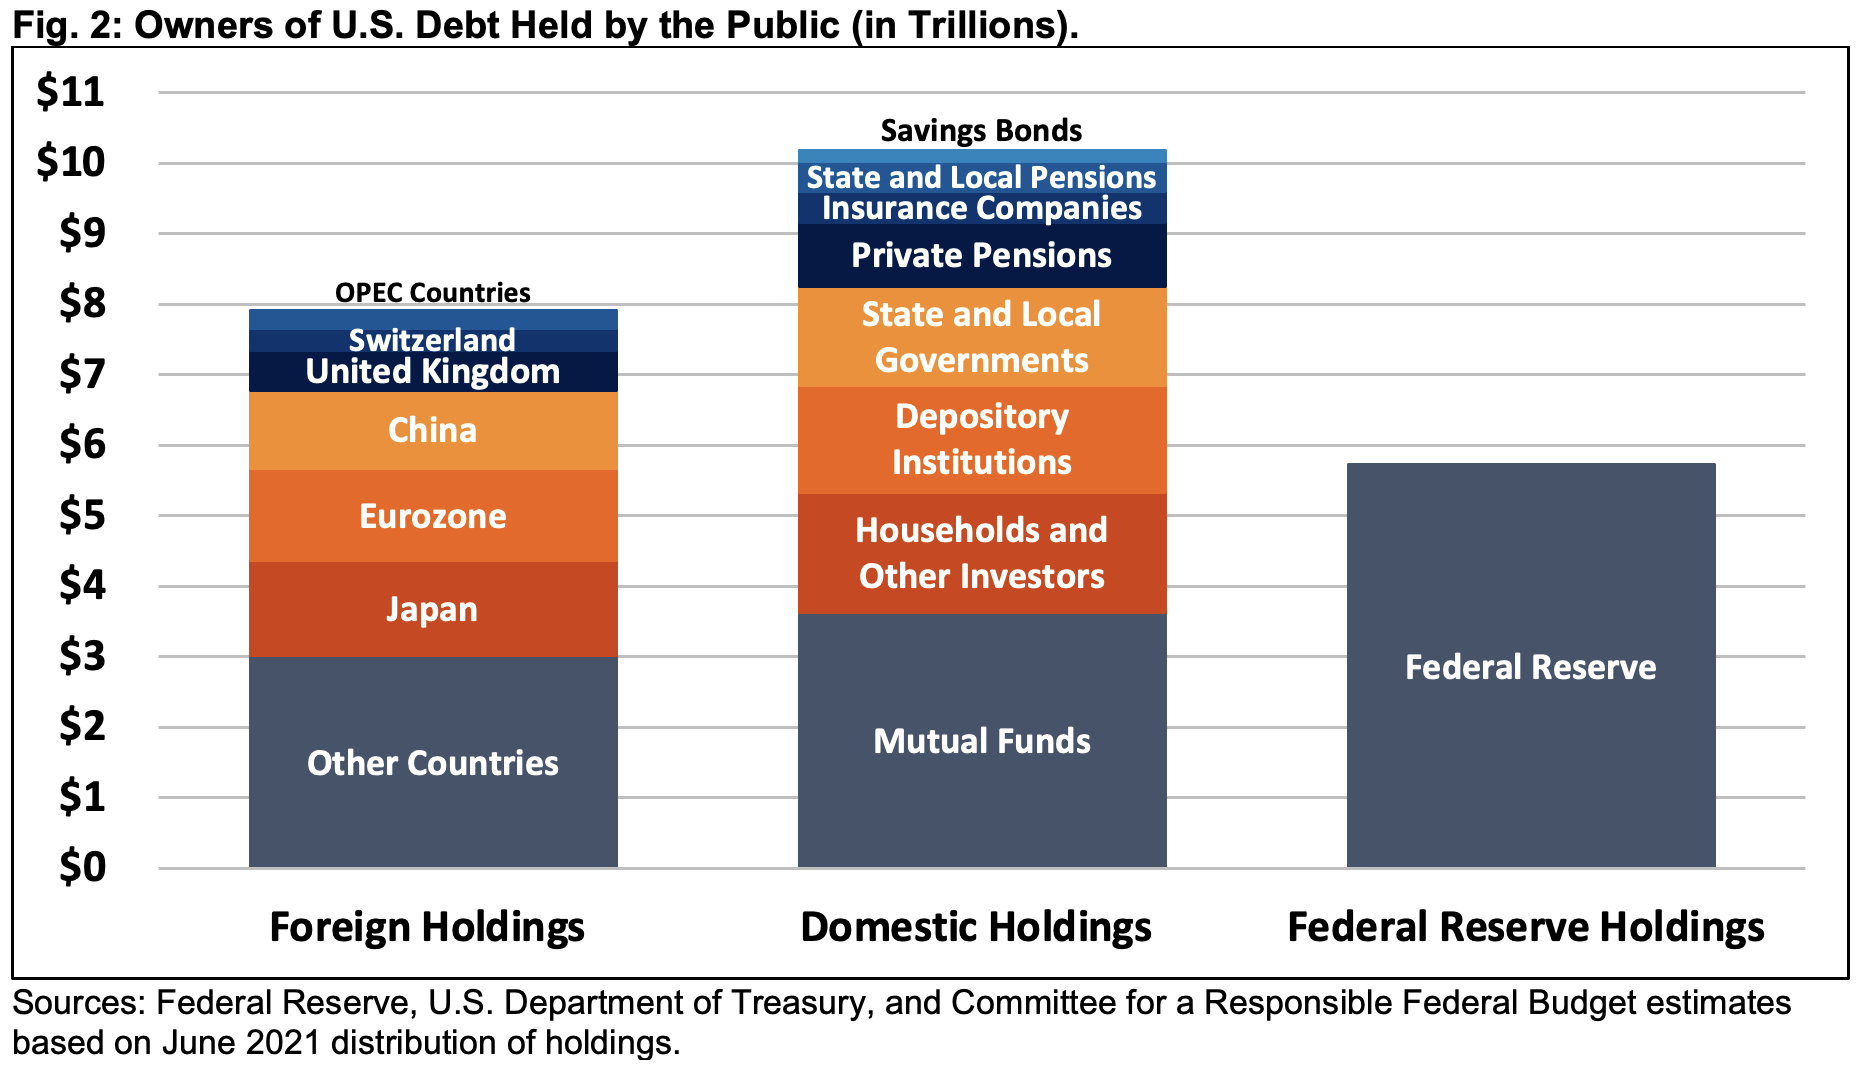 Owners of U.S. Debt Held by the Public (in Trillions) 